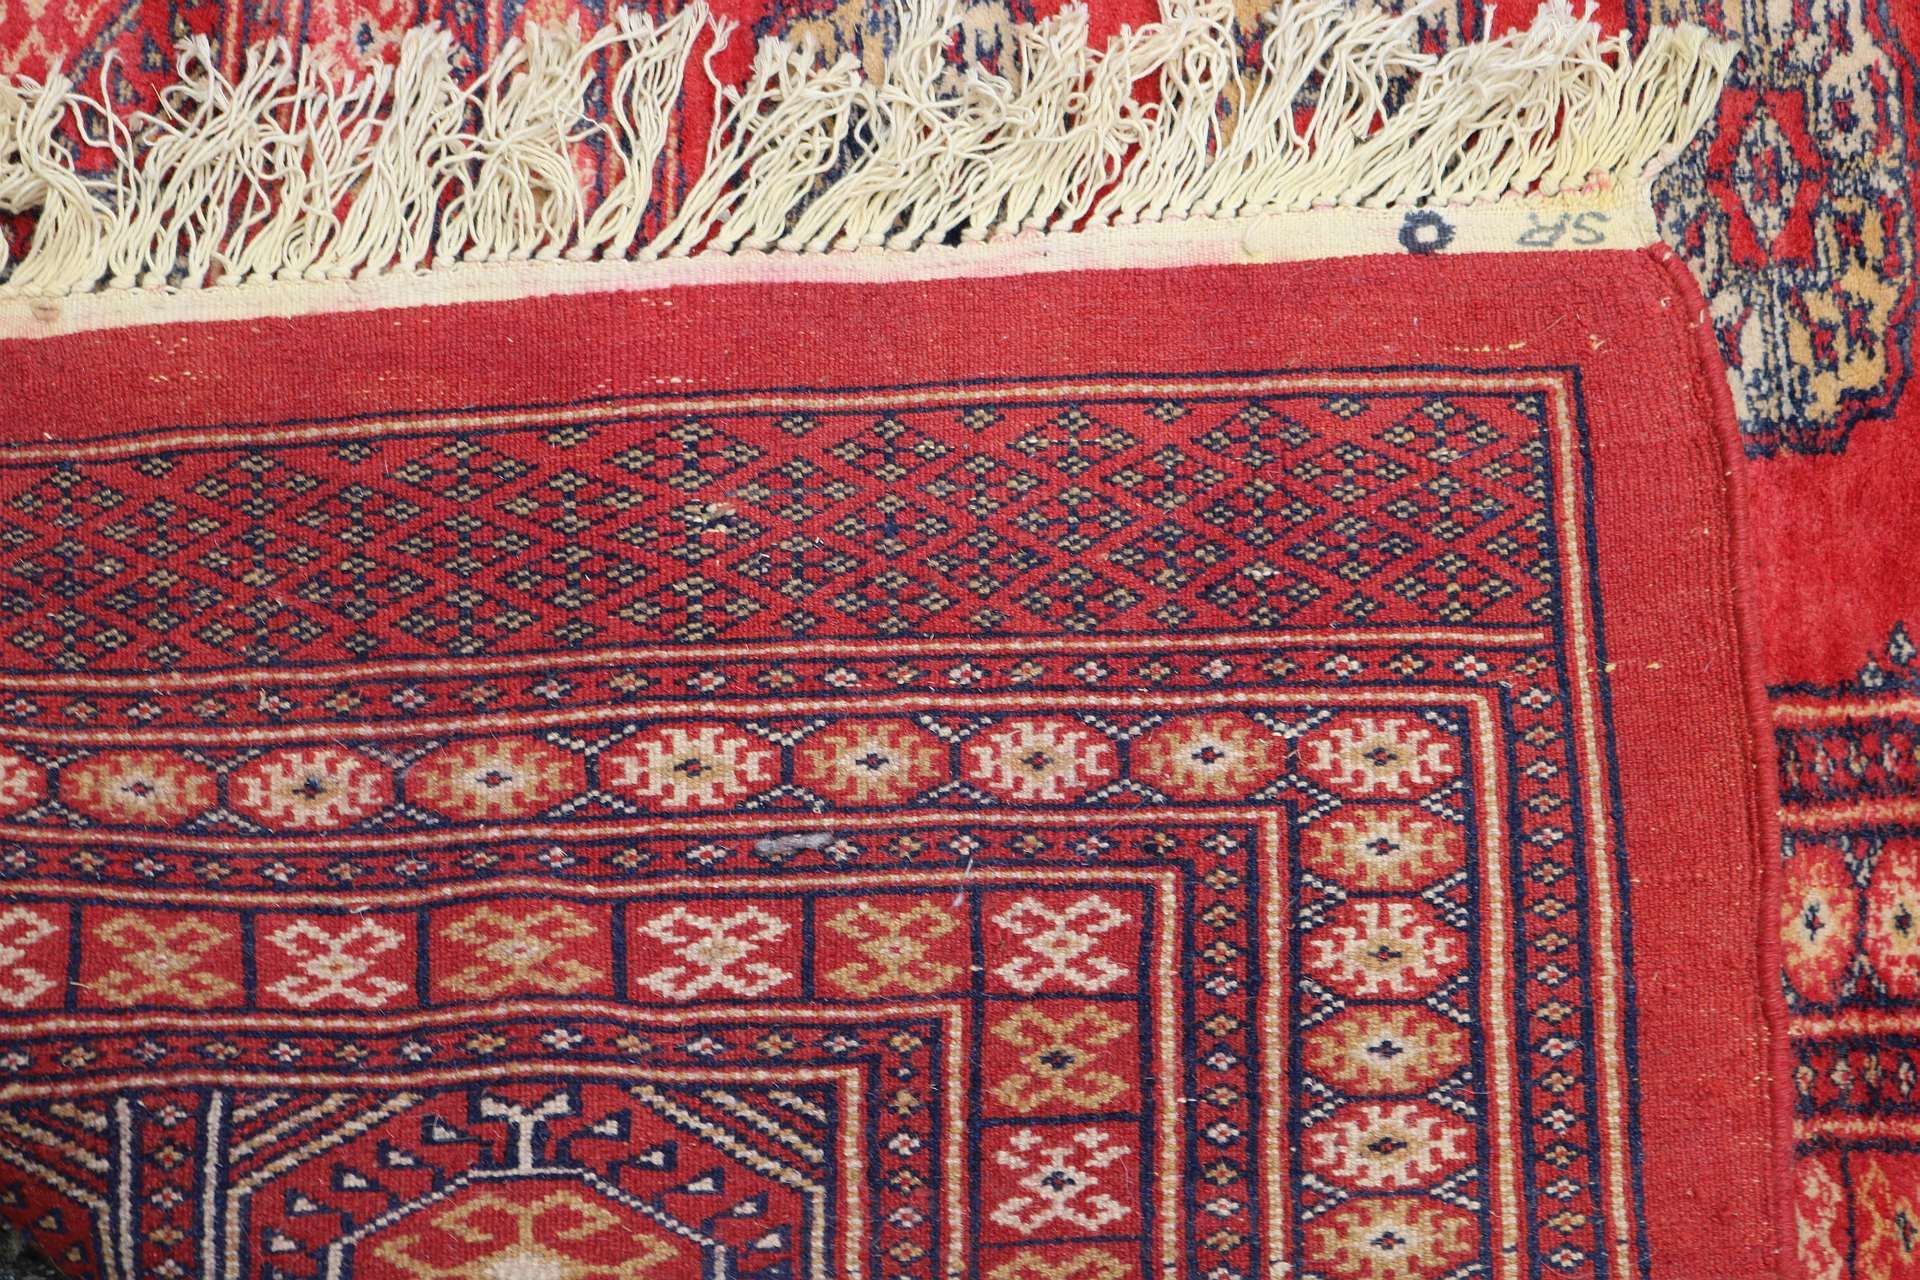 Large Persian rug, 251 x 363 cm. - Image 3 of 3